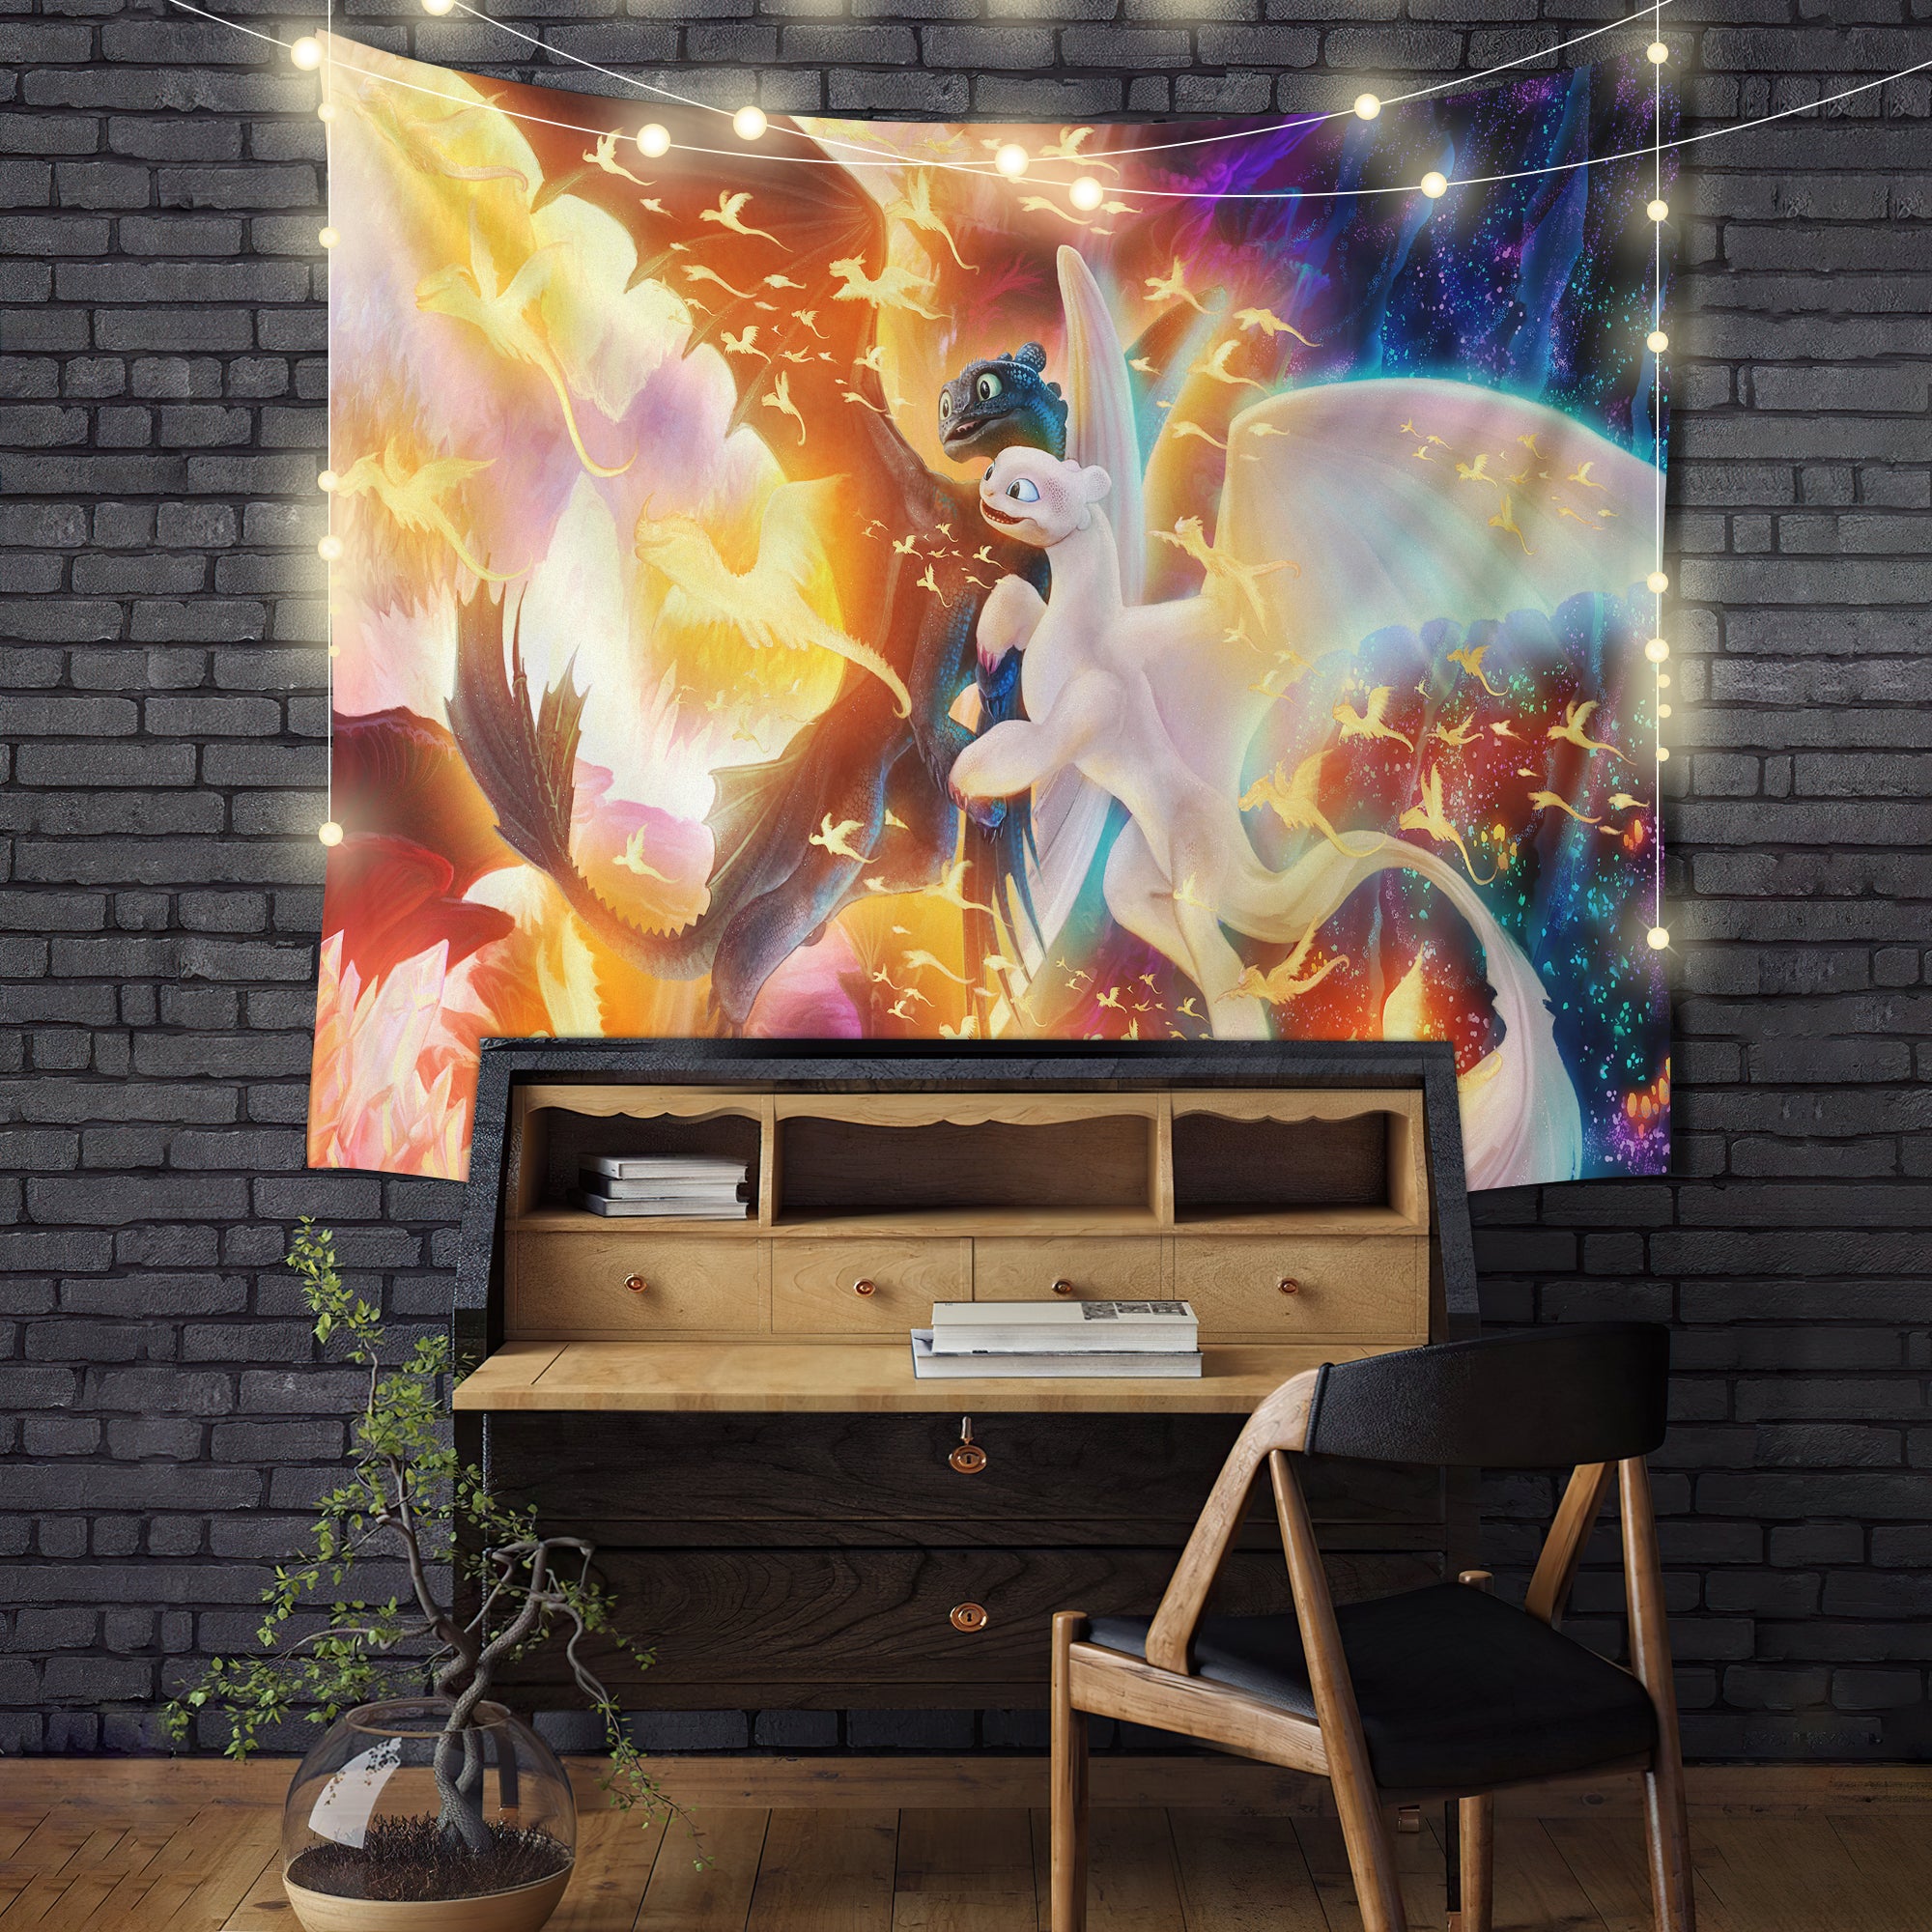 Toothless And Light Fury How To Train Your Dragon Tapestry Room Decor Nearkii